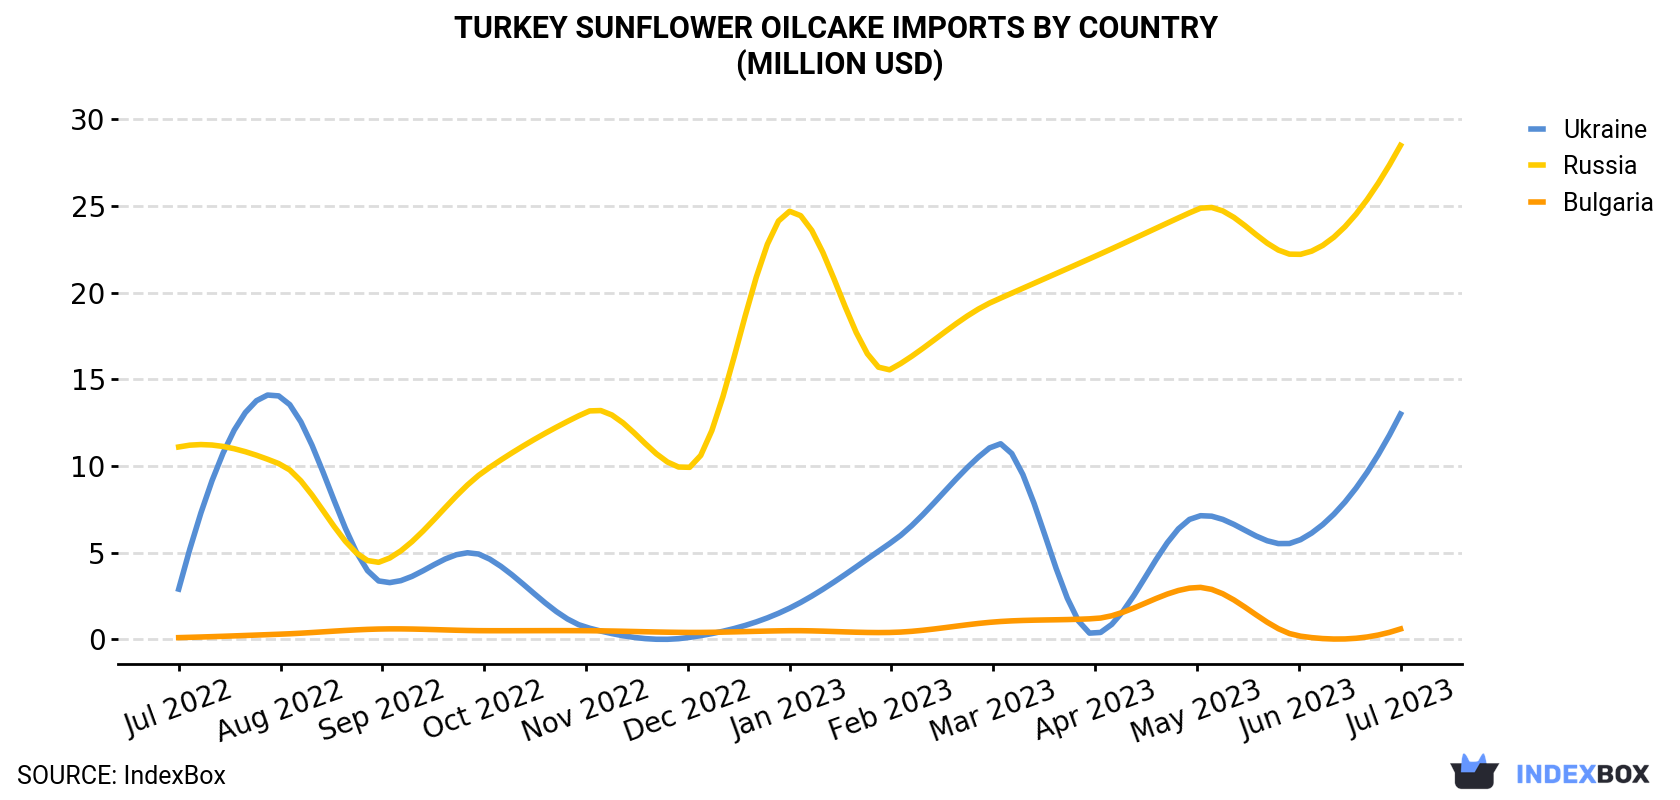 Turkey Sunflower Oilcake Imports By Country (Million USD)